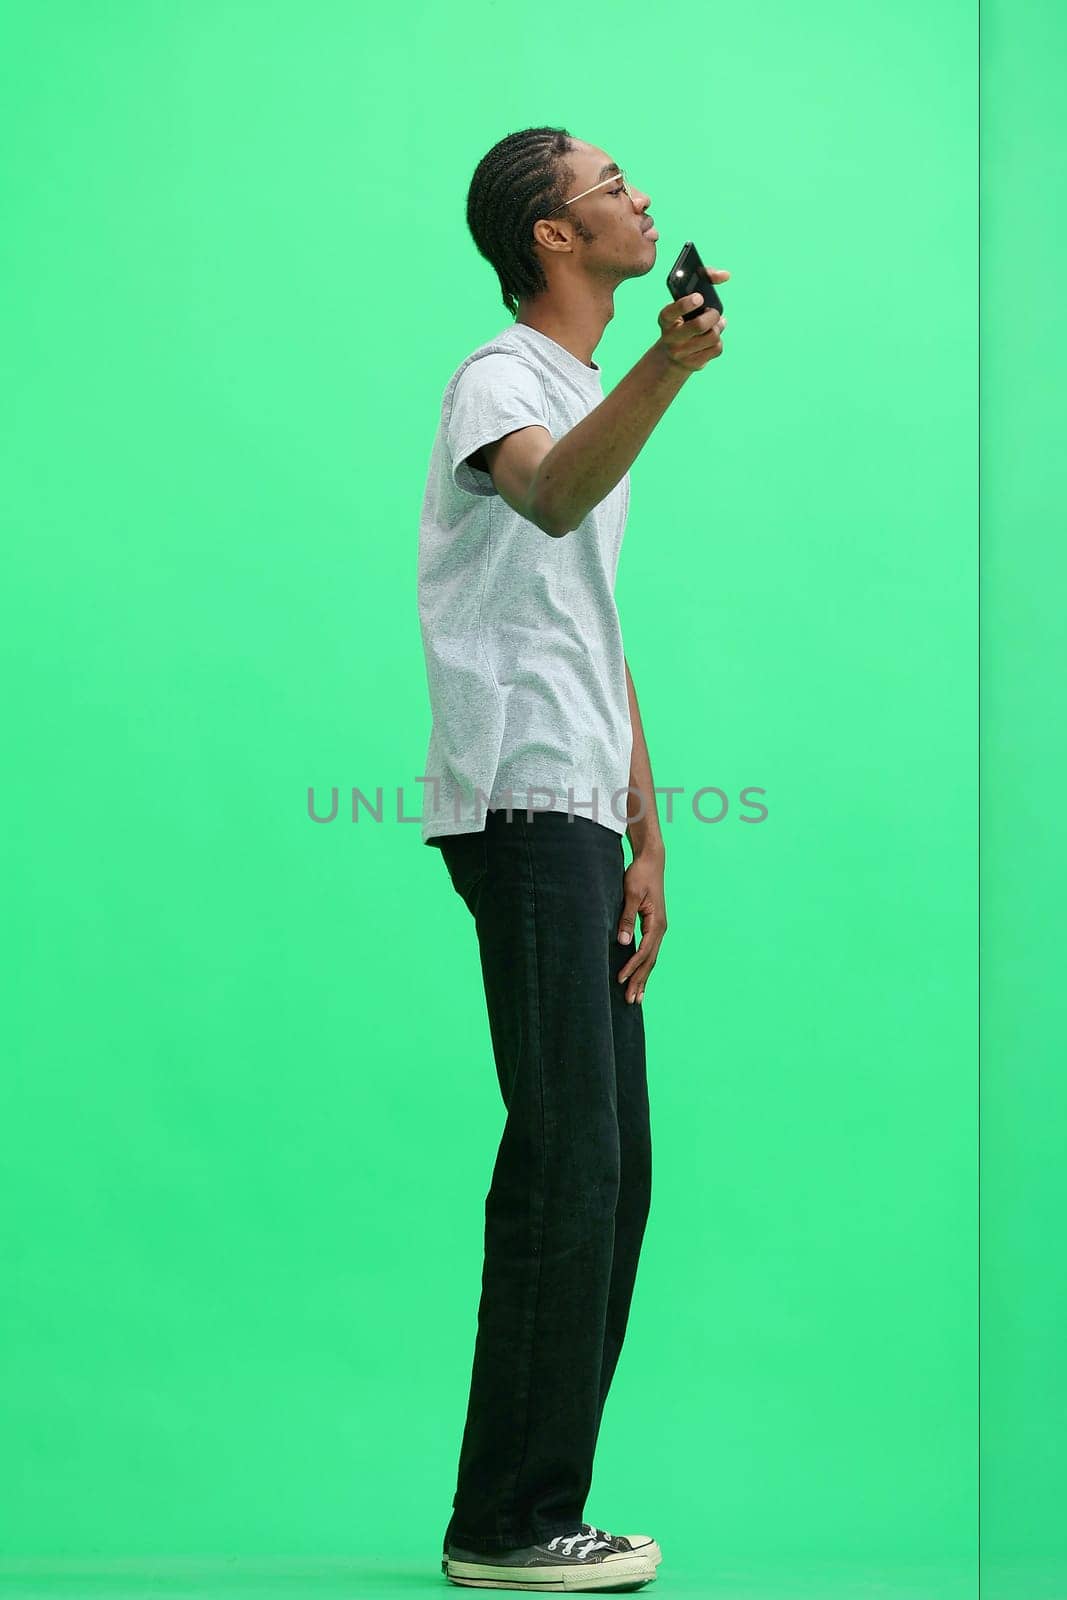 A man in a gray T-shirt, on a green background, in full height, waving his phone.